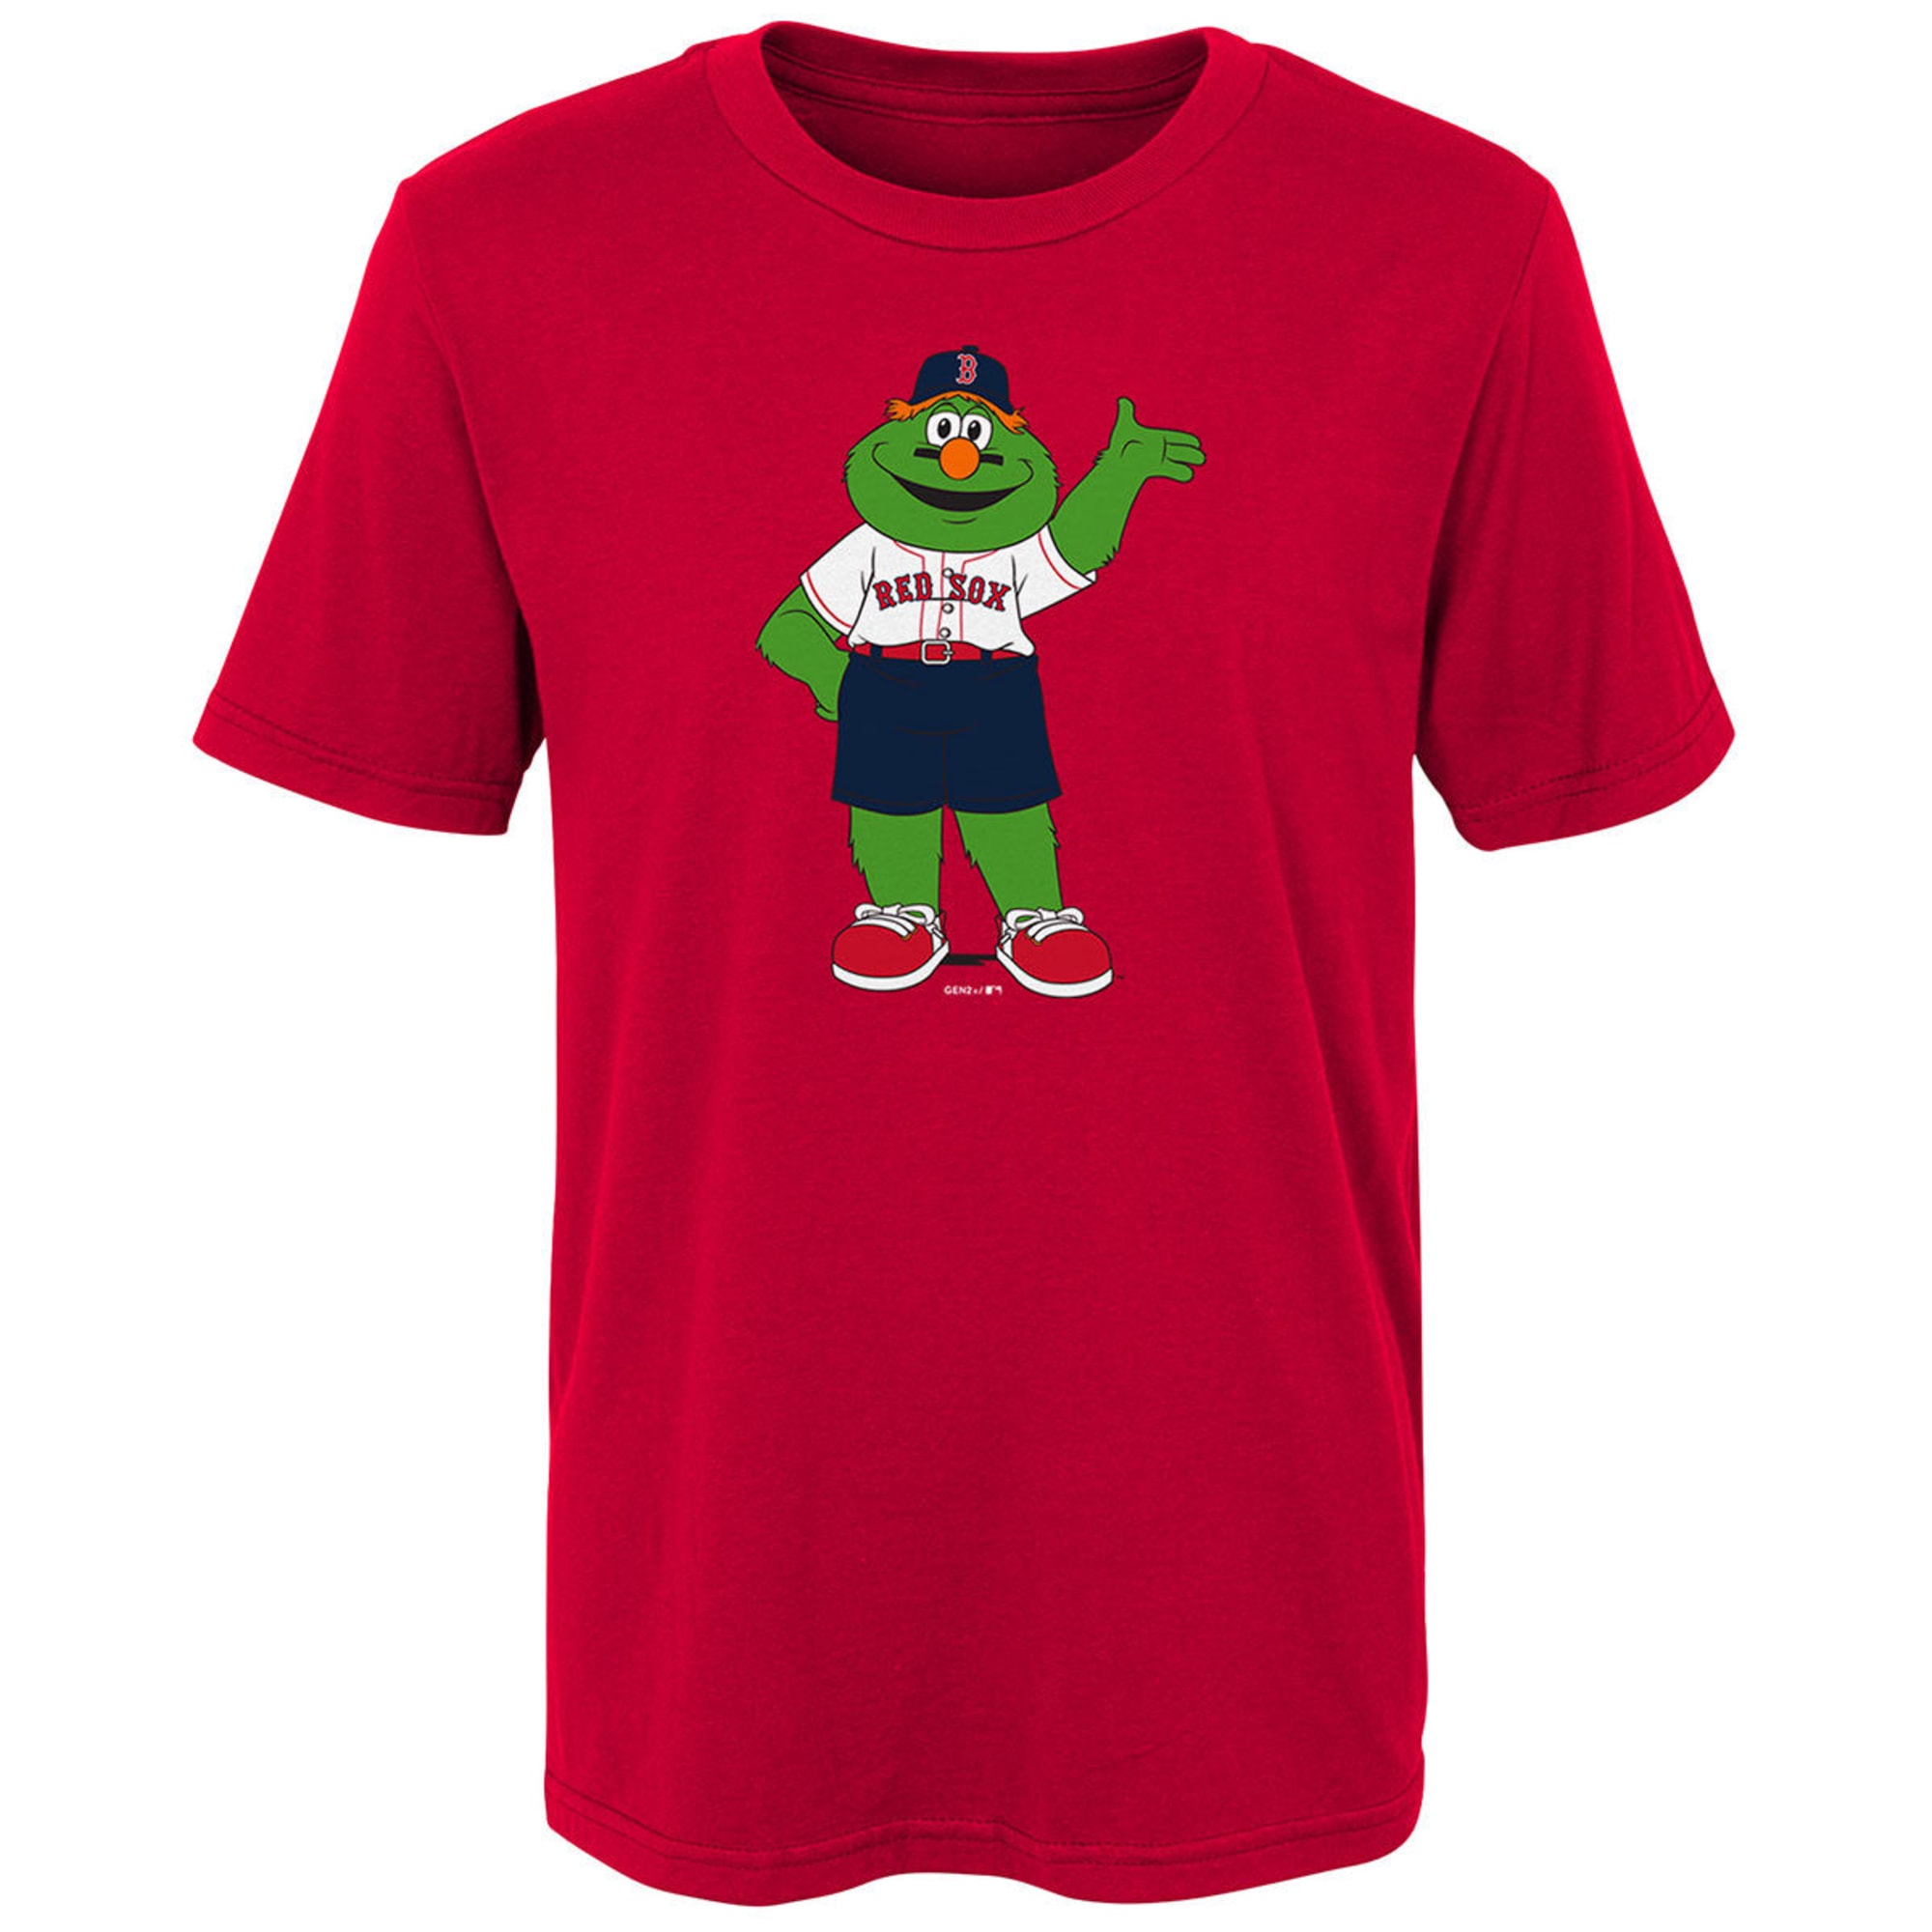 Official boston Red Sox Mascot Wally The Green Monster Shirt